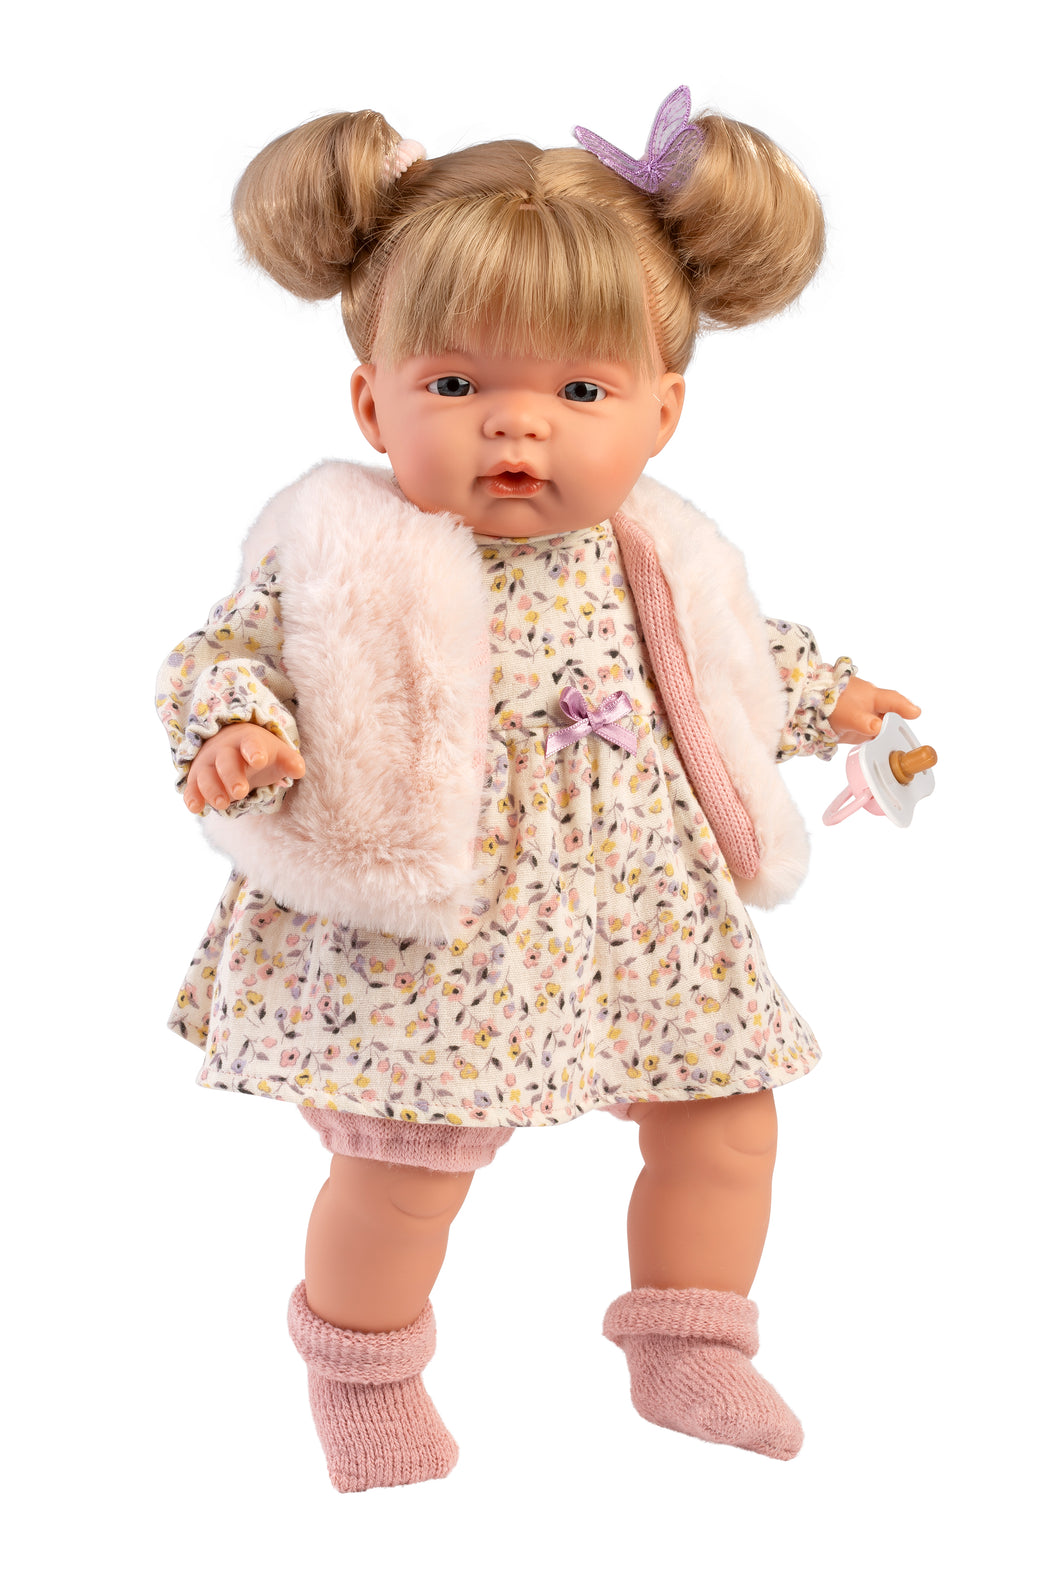 38360 Joelle Crying Baby Doll